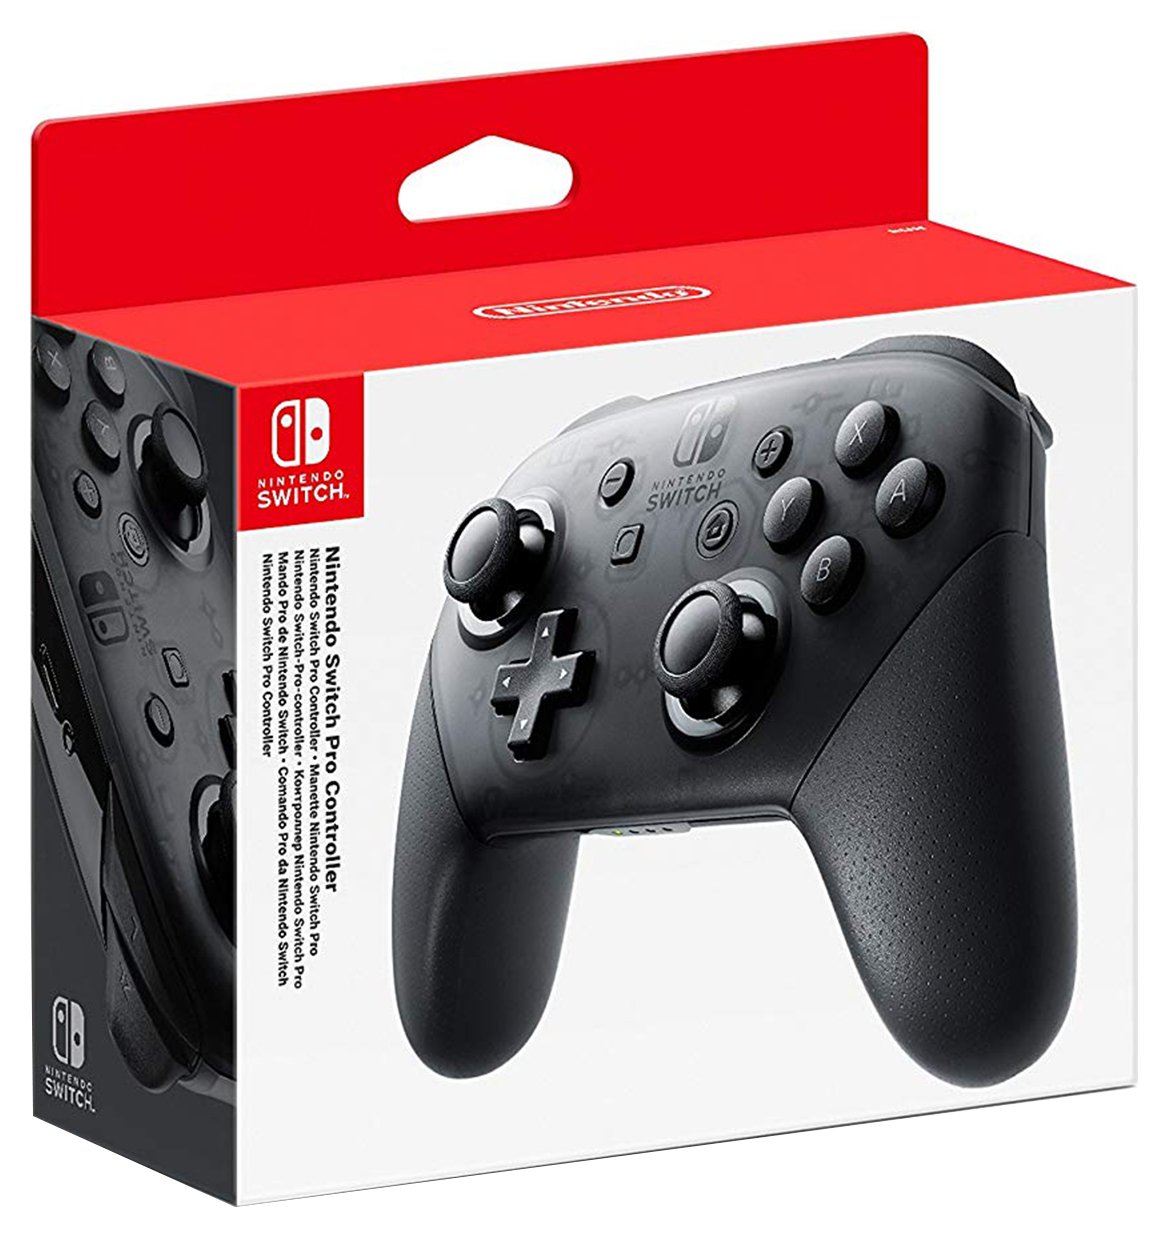 Nintendo Switch Pro Wireless Controller Review